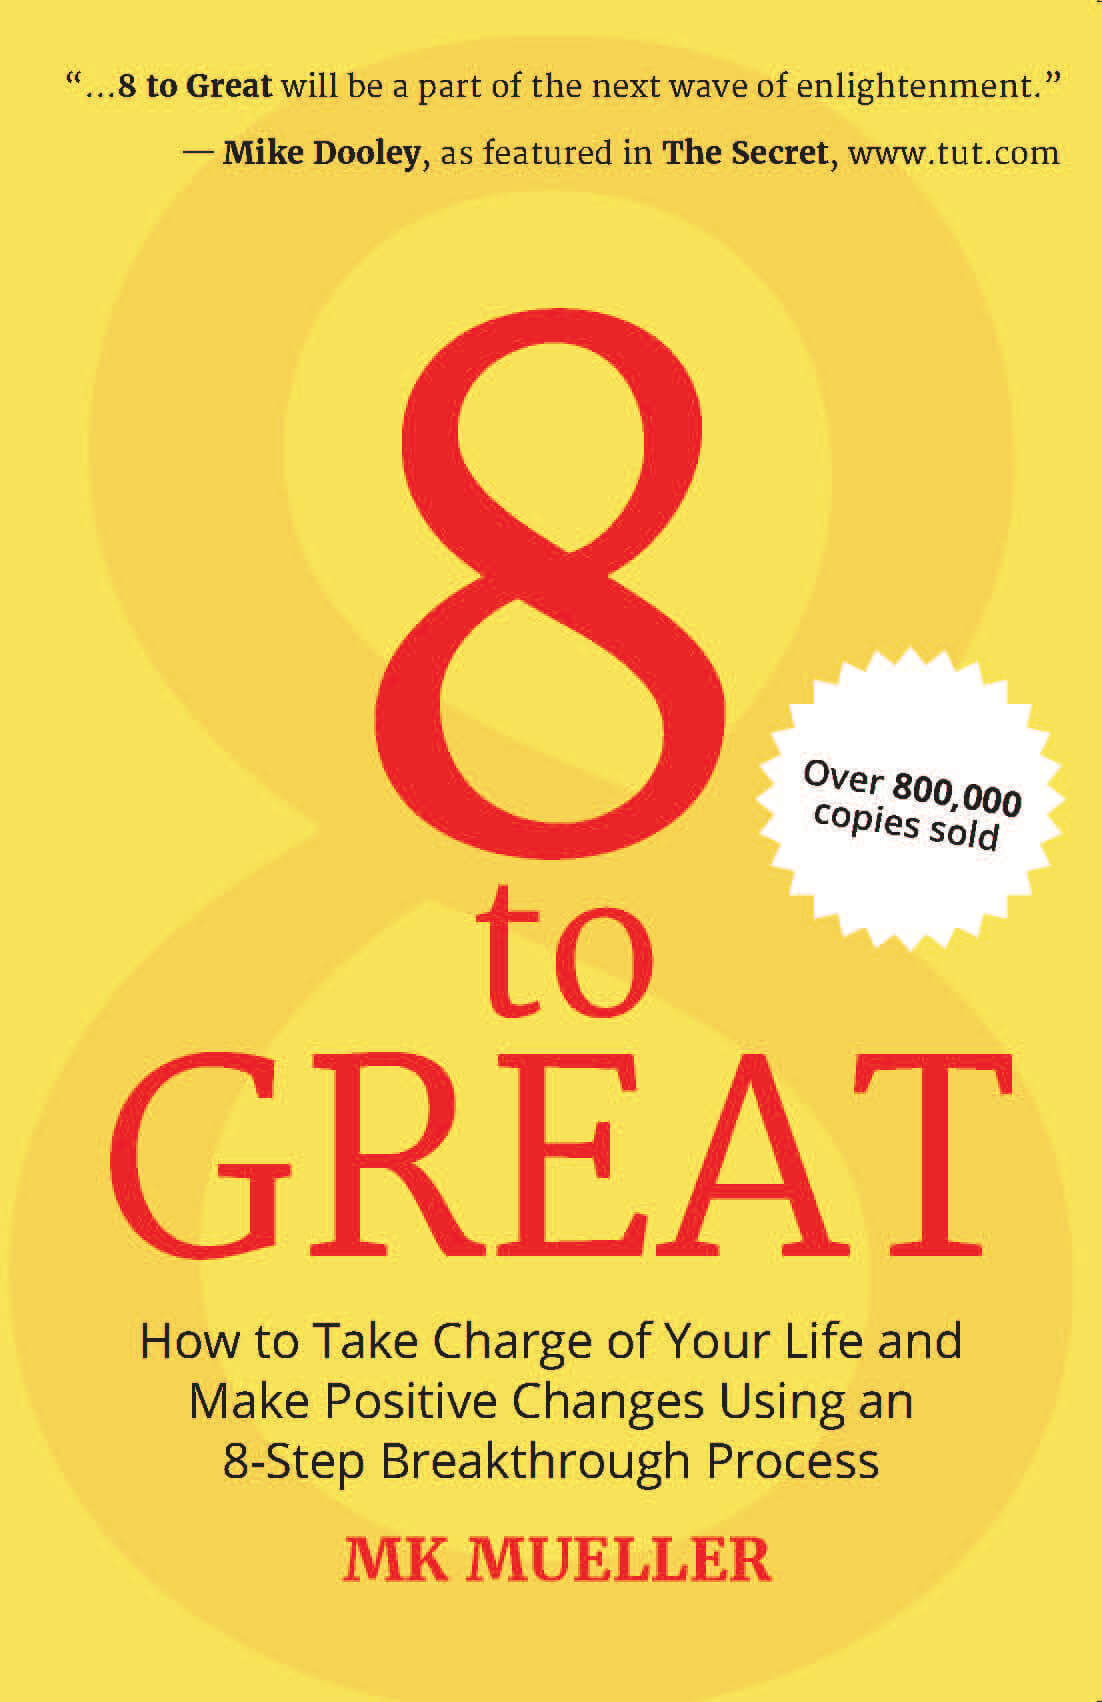 8 to Great: How to Take Charge of Your Life and Make Positive Changes 